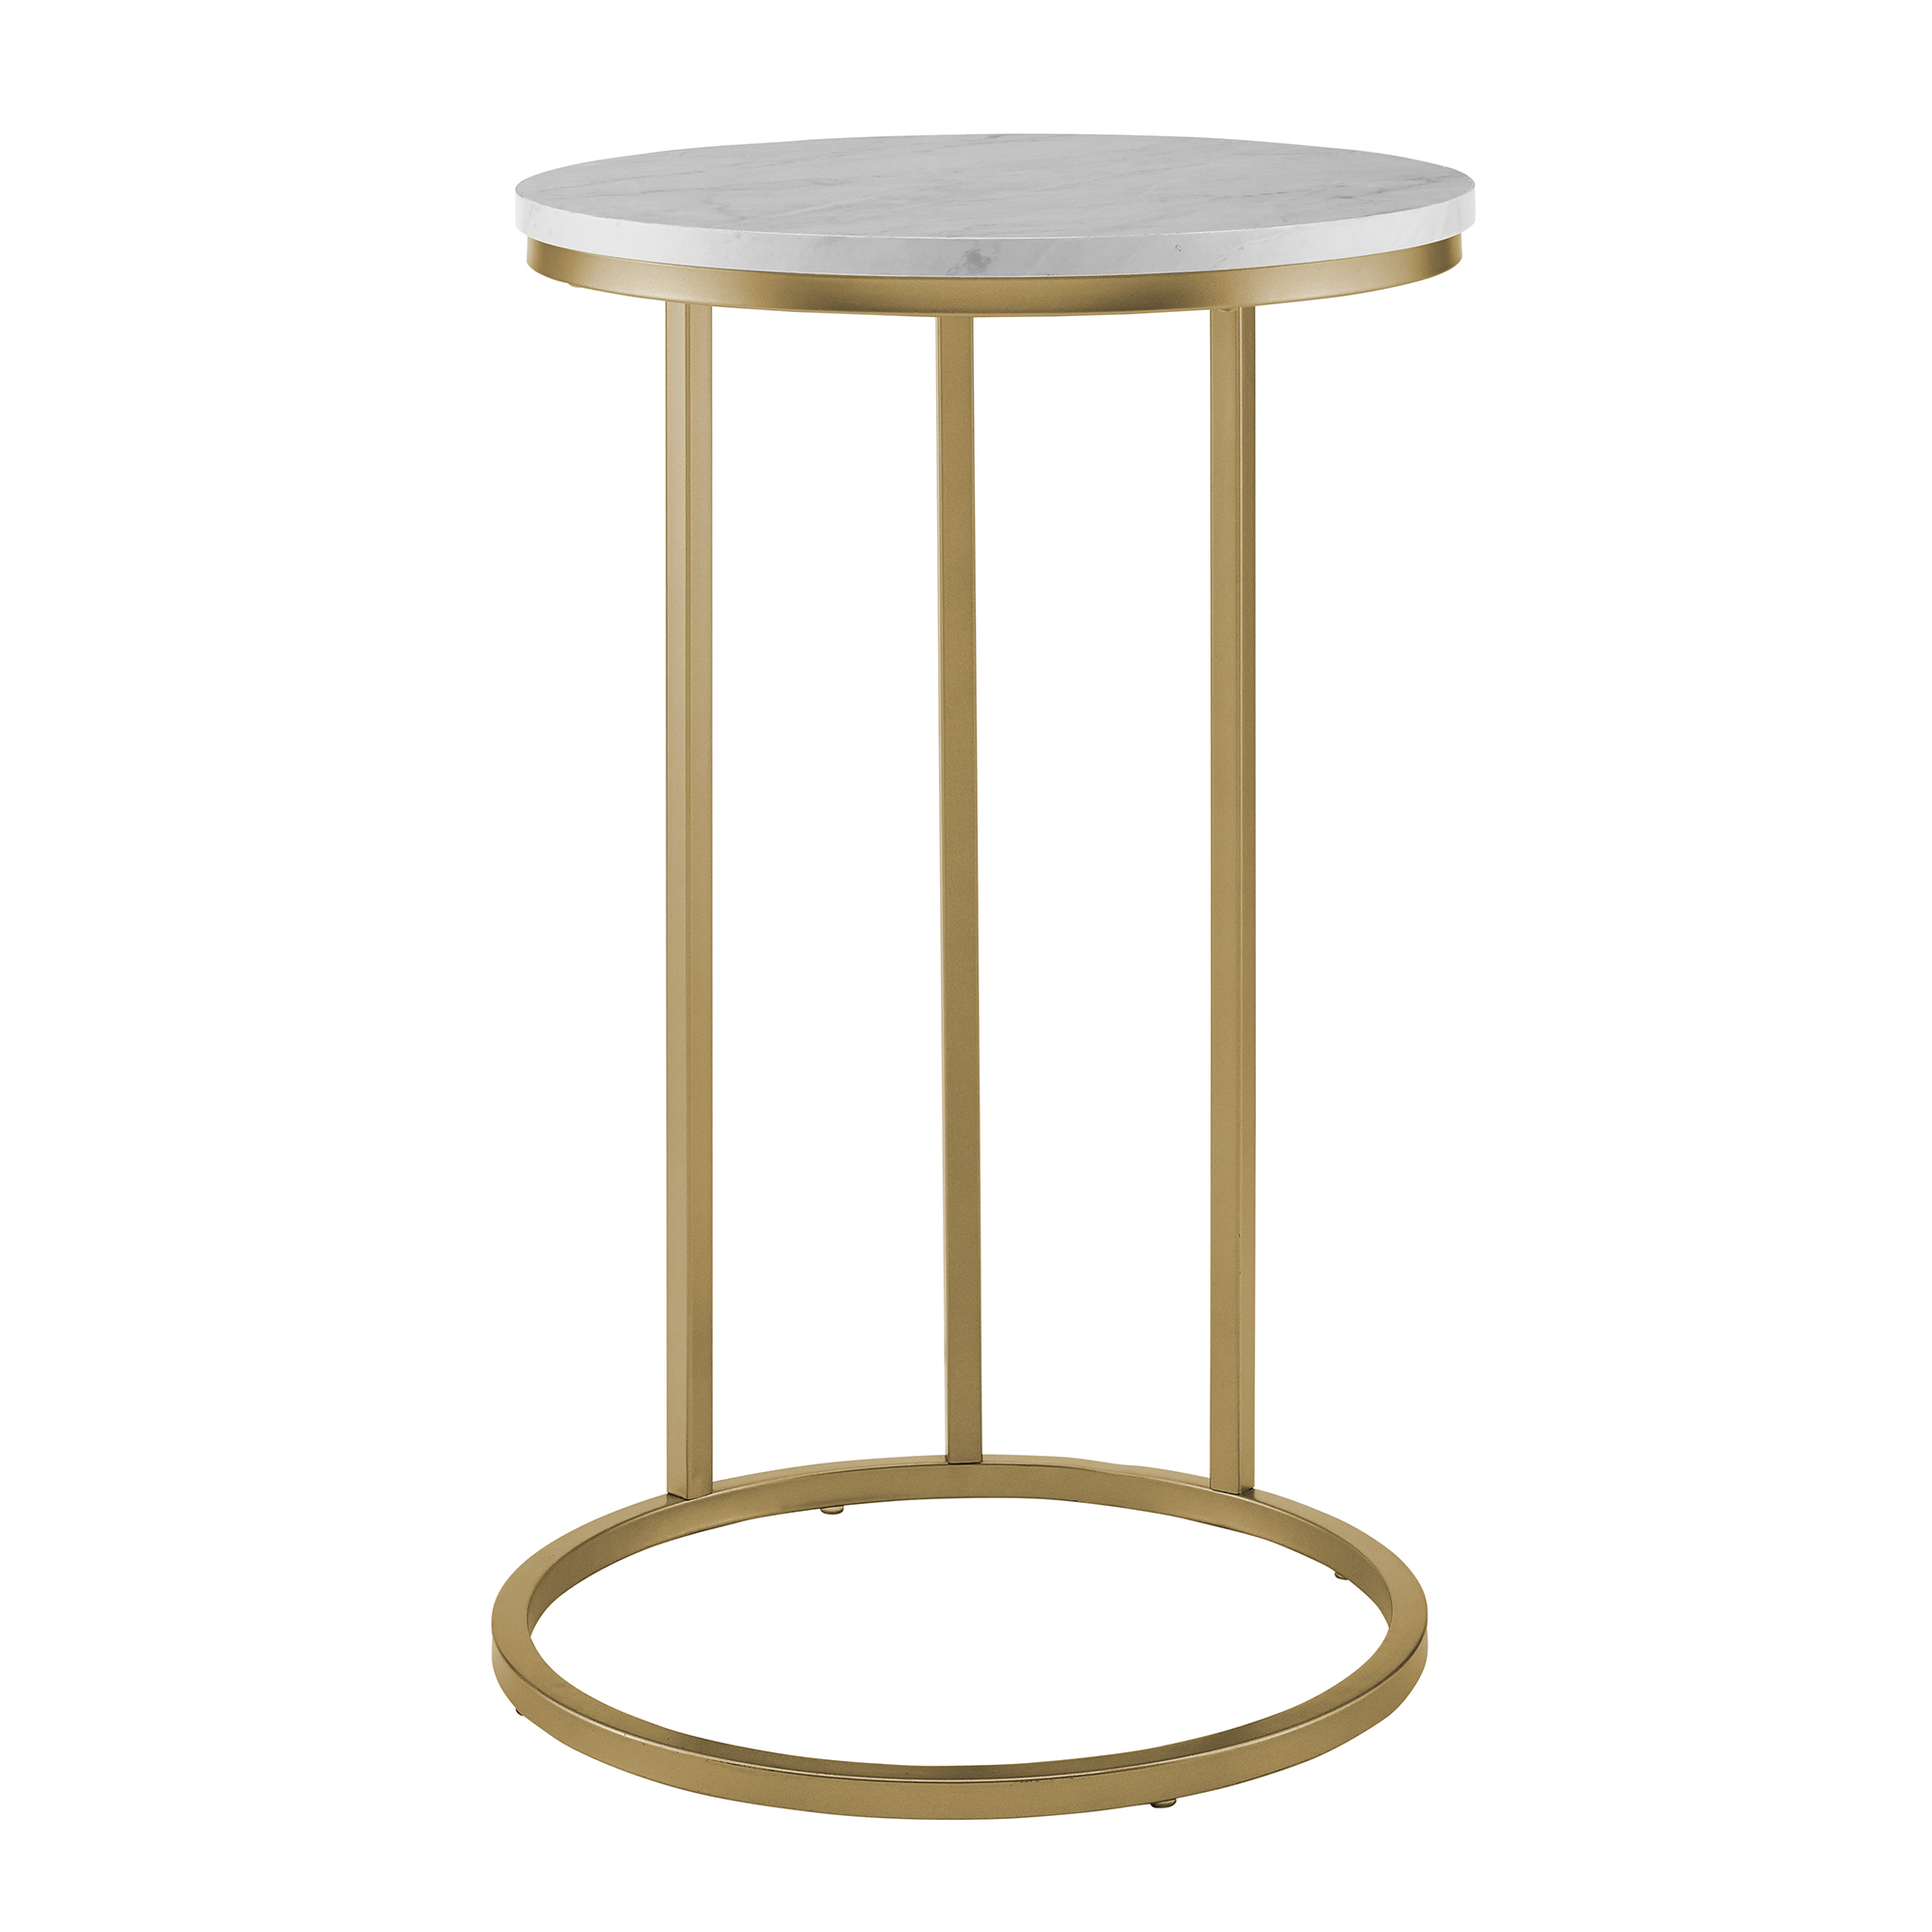 manor park modern round end table white marble top gold base accent under outdoor timber small oak value furniture lucite console between two chairs retro bedroom animal print